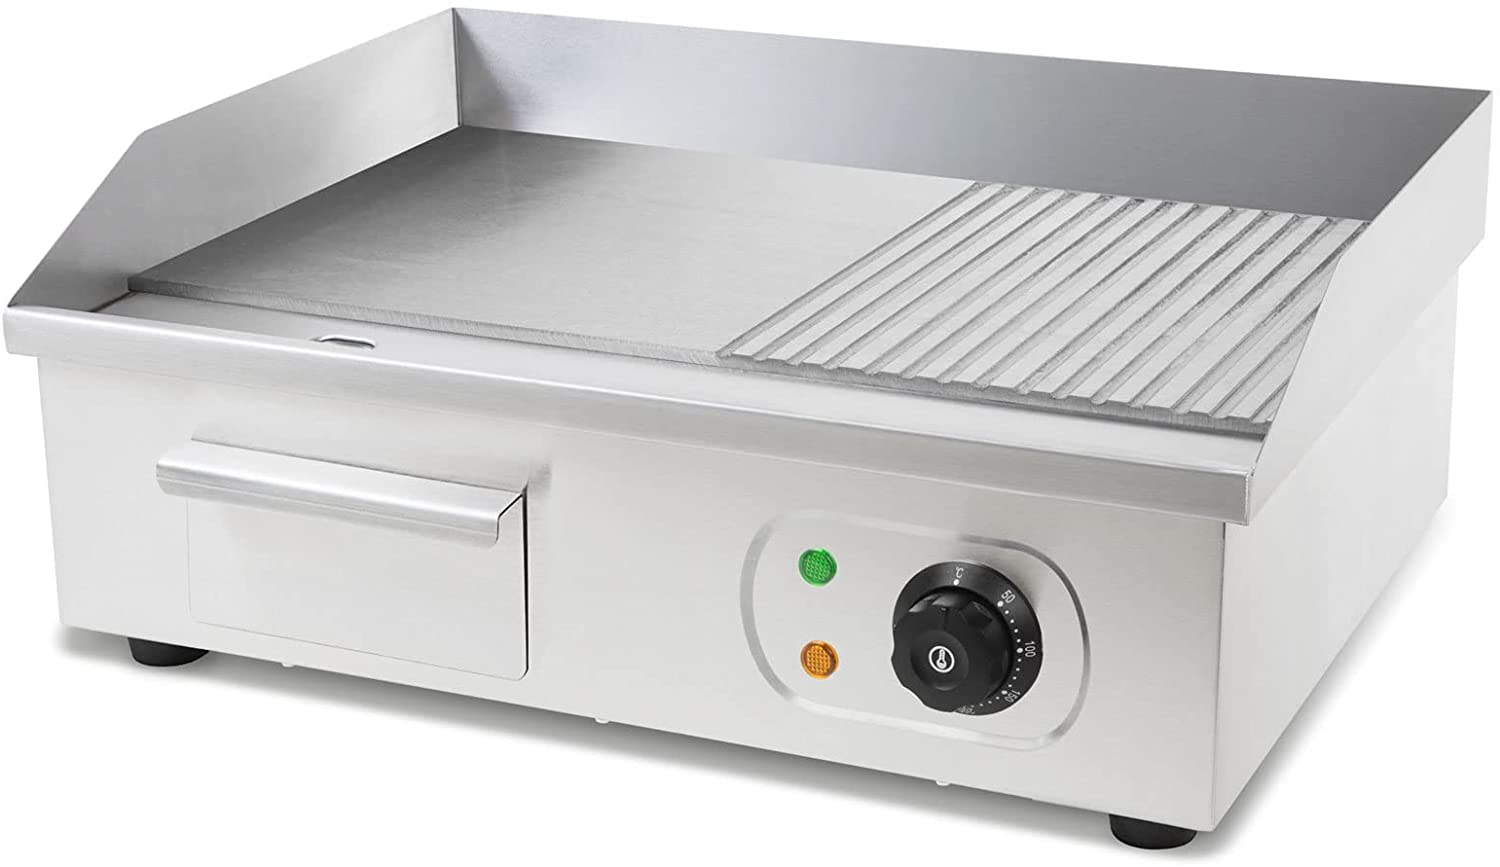 Eberth Vertes Grill Plate, Plancha Grill, Electric 3000 W, Stainless Steel (Grill Surface, Smooth & With Grooves, 55 x 35 cm, Thermostat, Temperature 50 - 300 °C, Spray & Heat Protection, Collection Container, Rubber Feet)